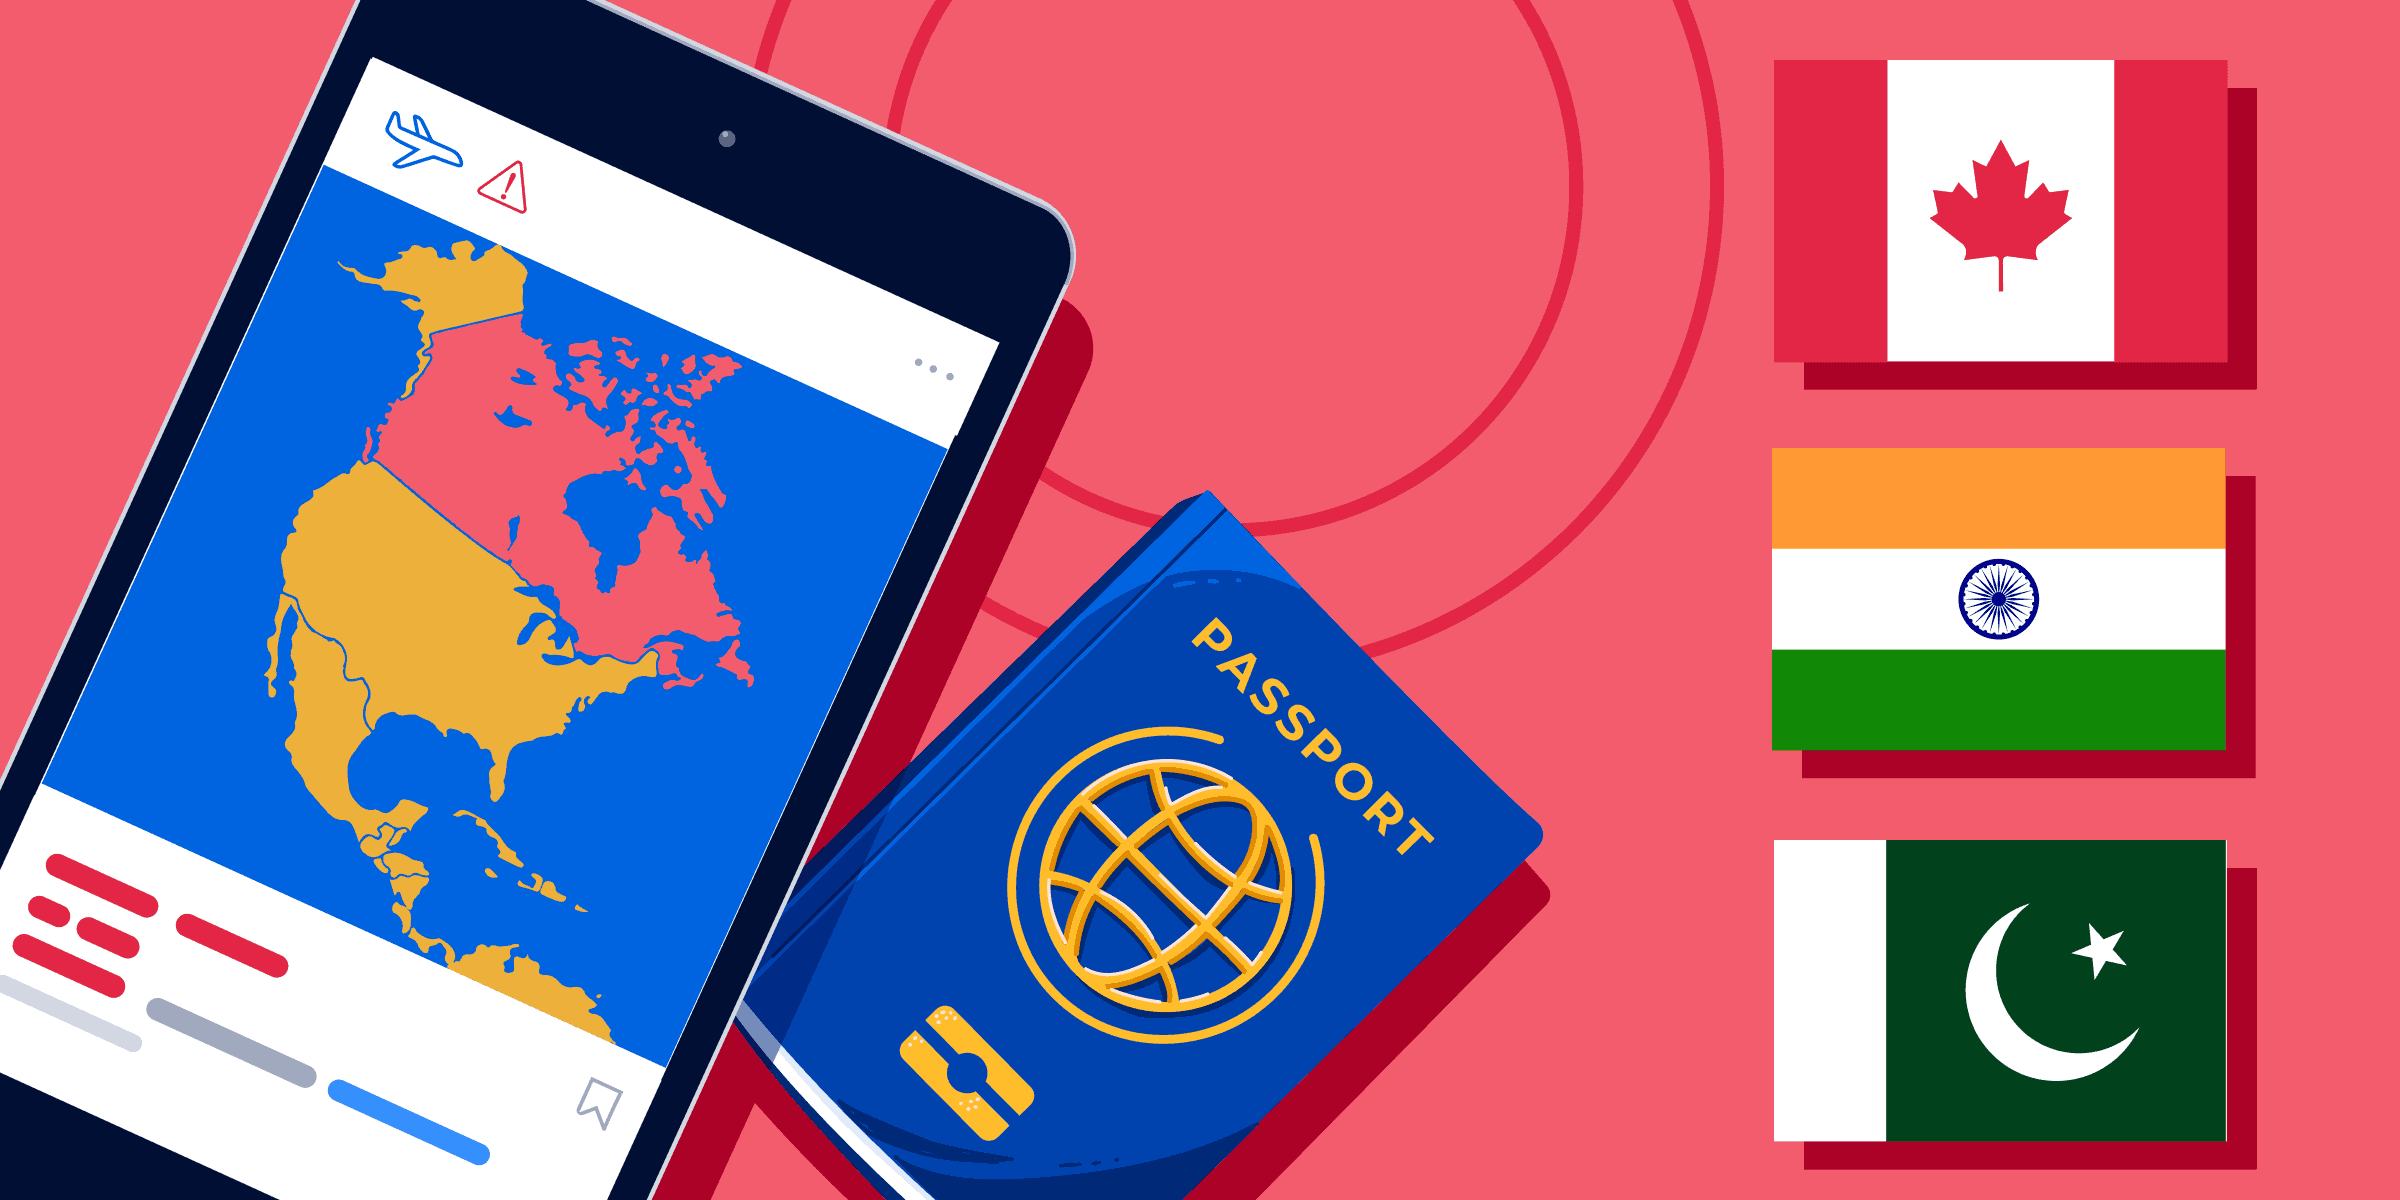 Illustration showing phone, passport and flags of Canada, India, and Pakistan